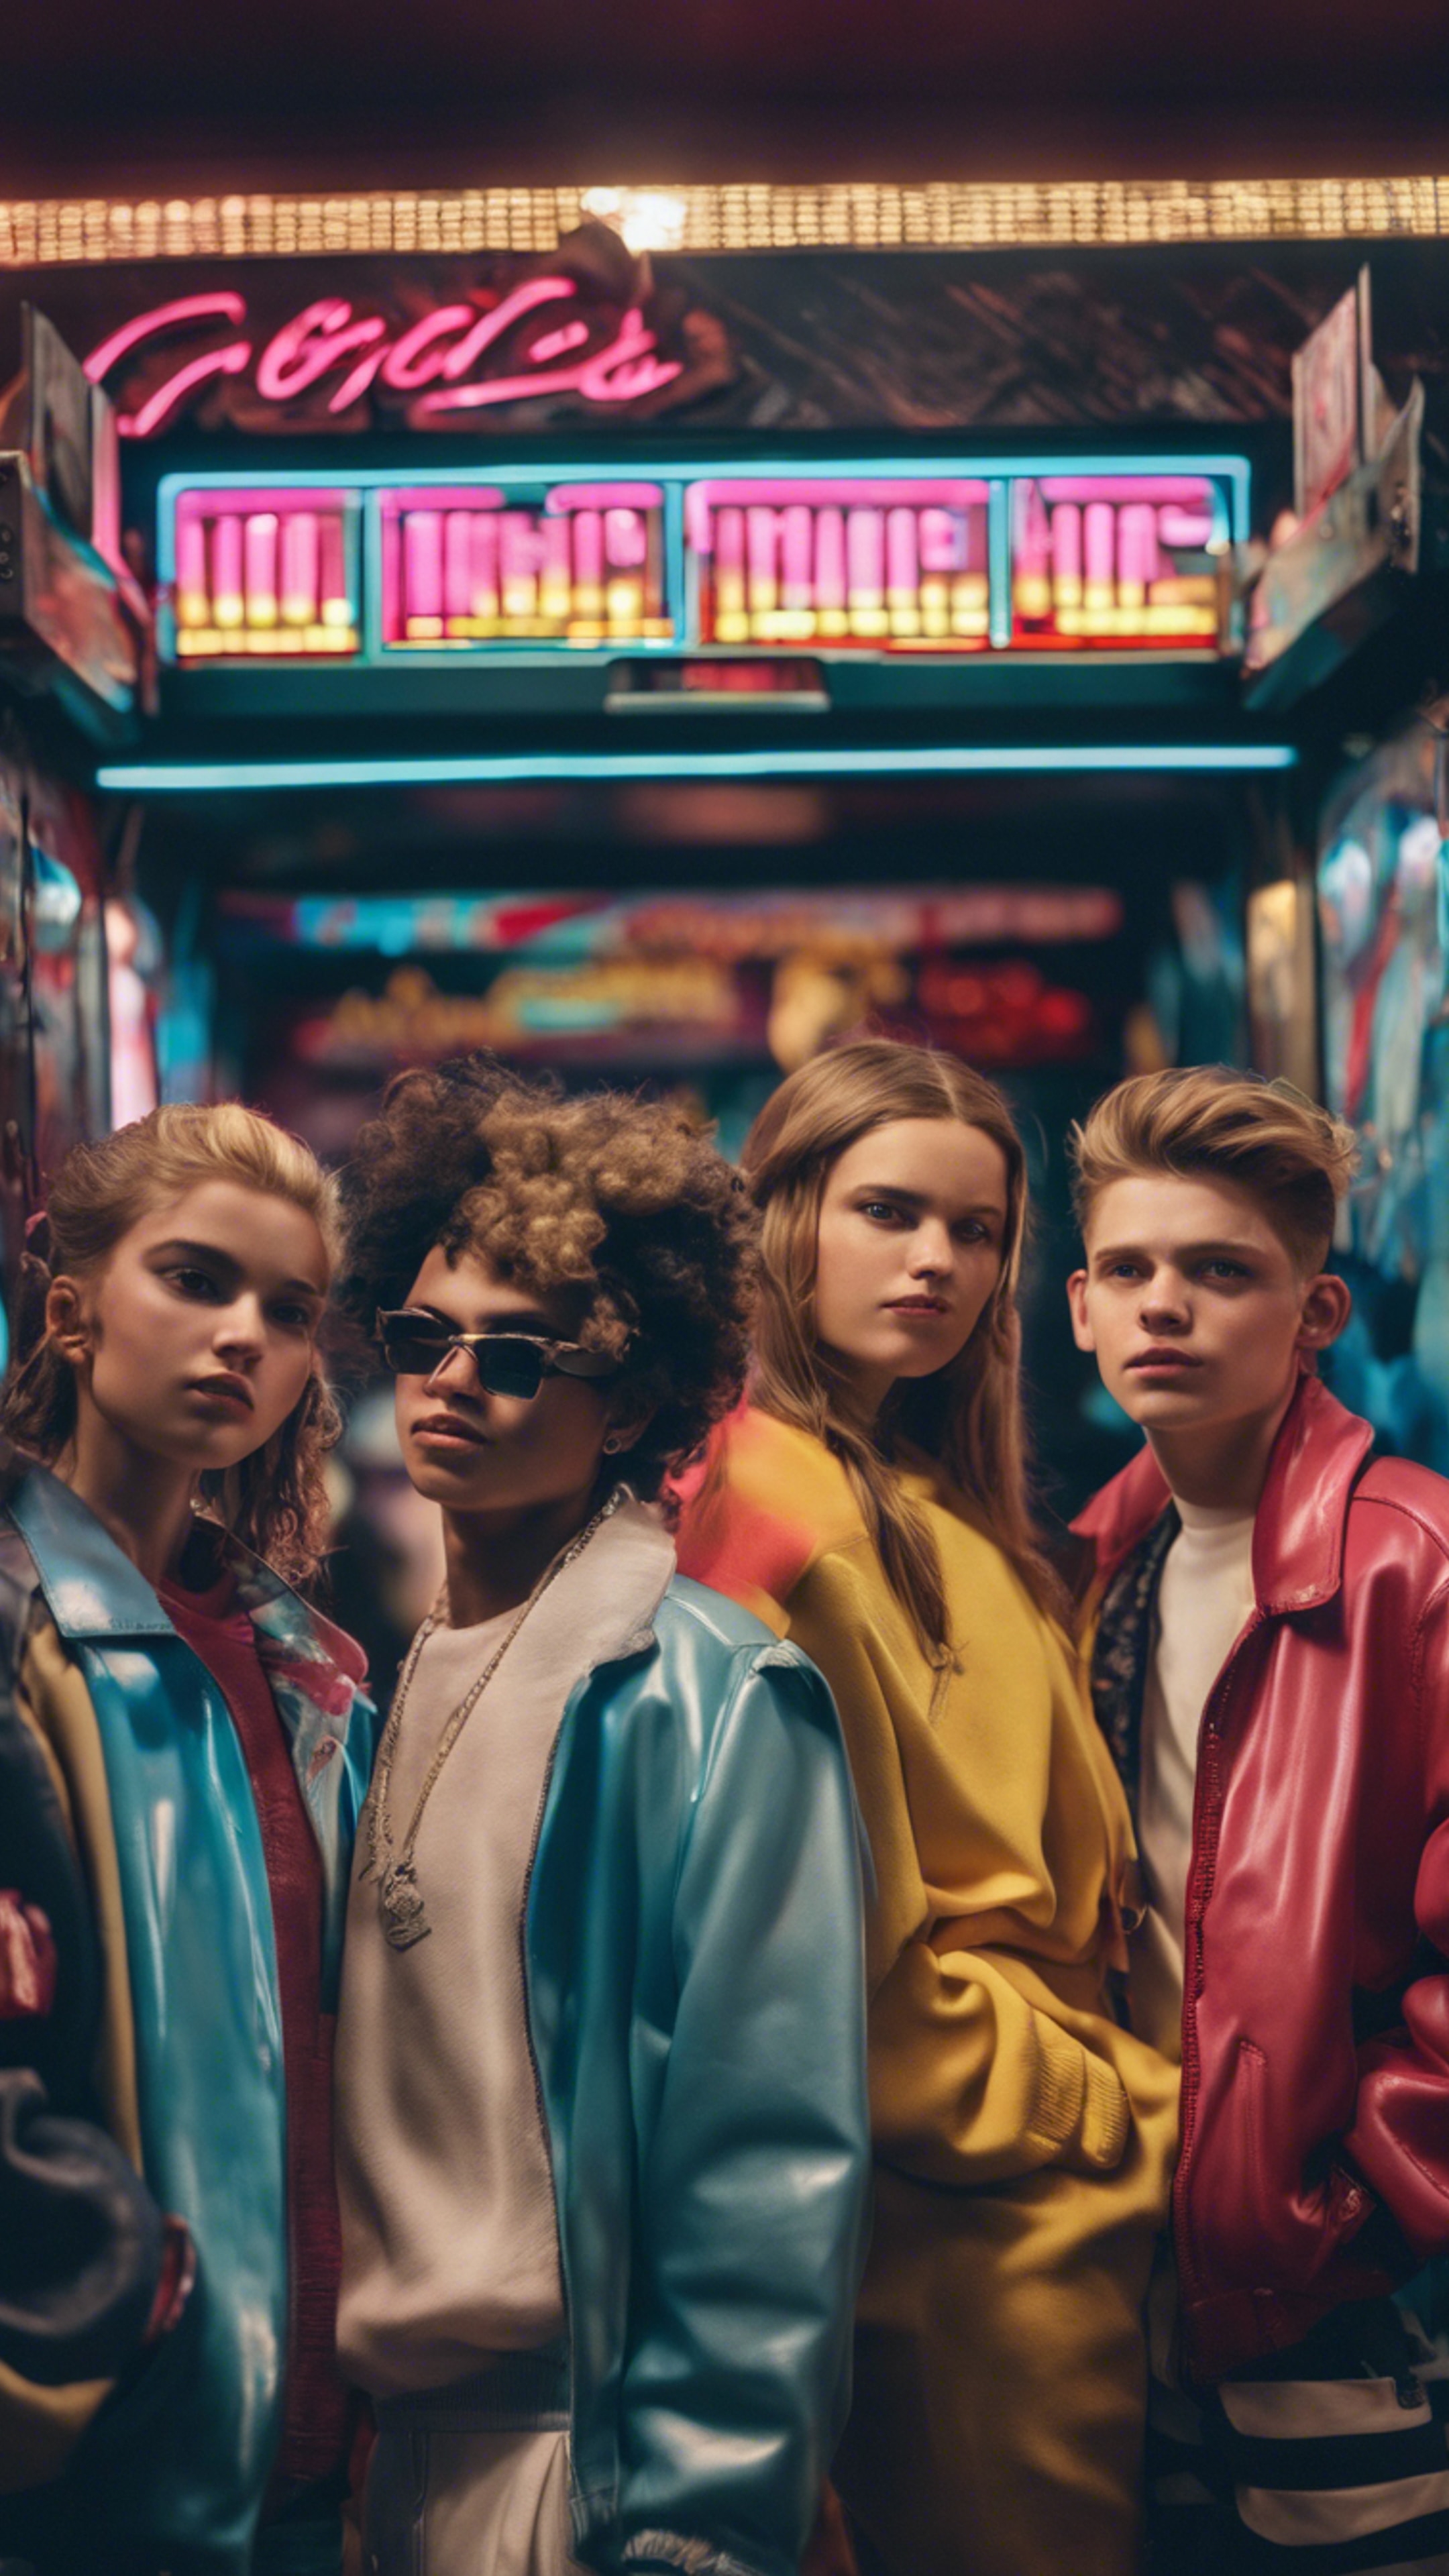 A group of teenagers dressed in iconic 80s fashion, hanging out at an arcade. Tapetai[419df1d215924a4a865f]